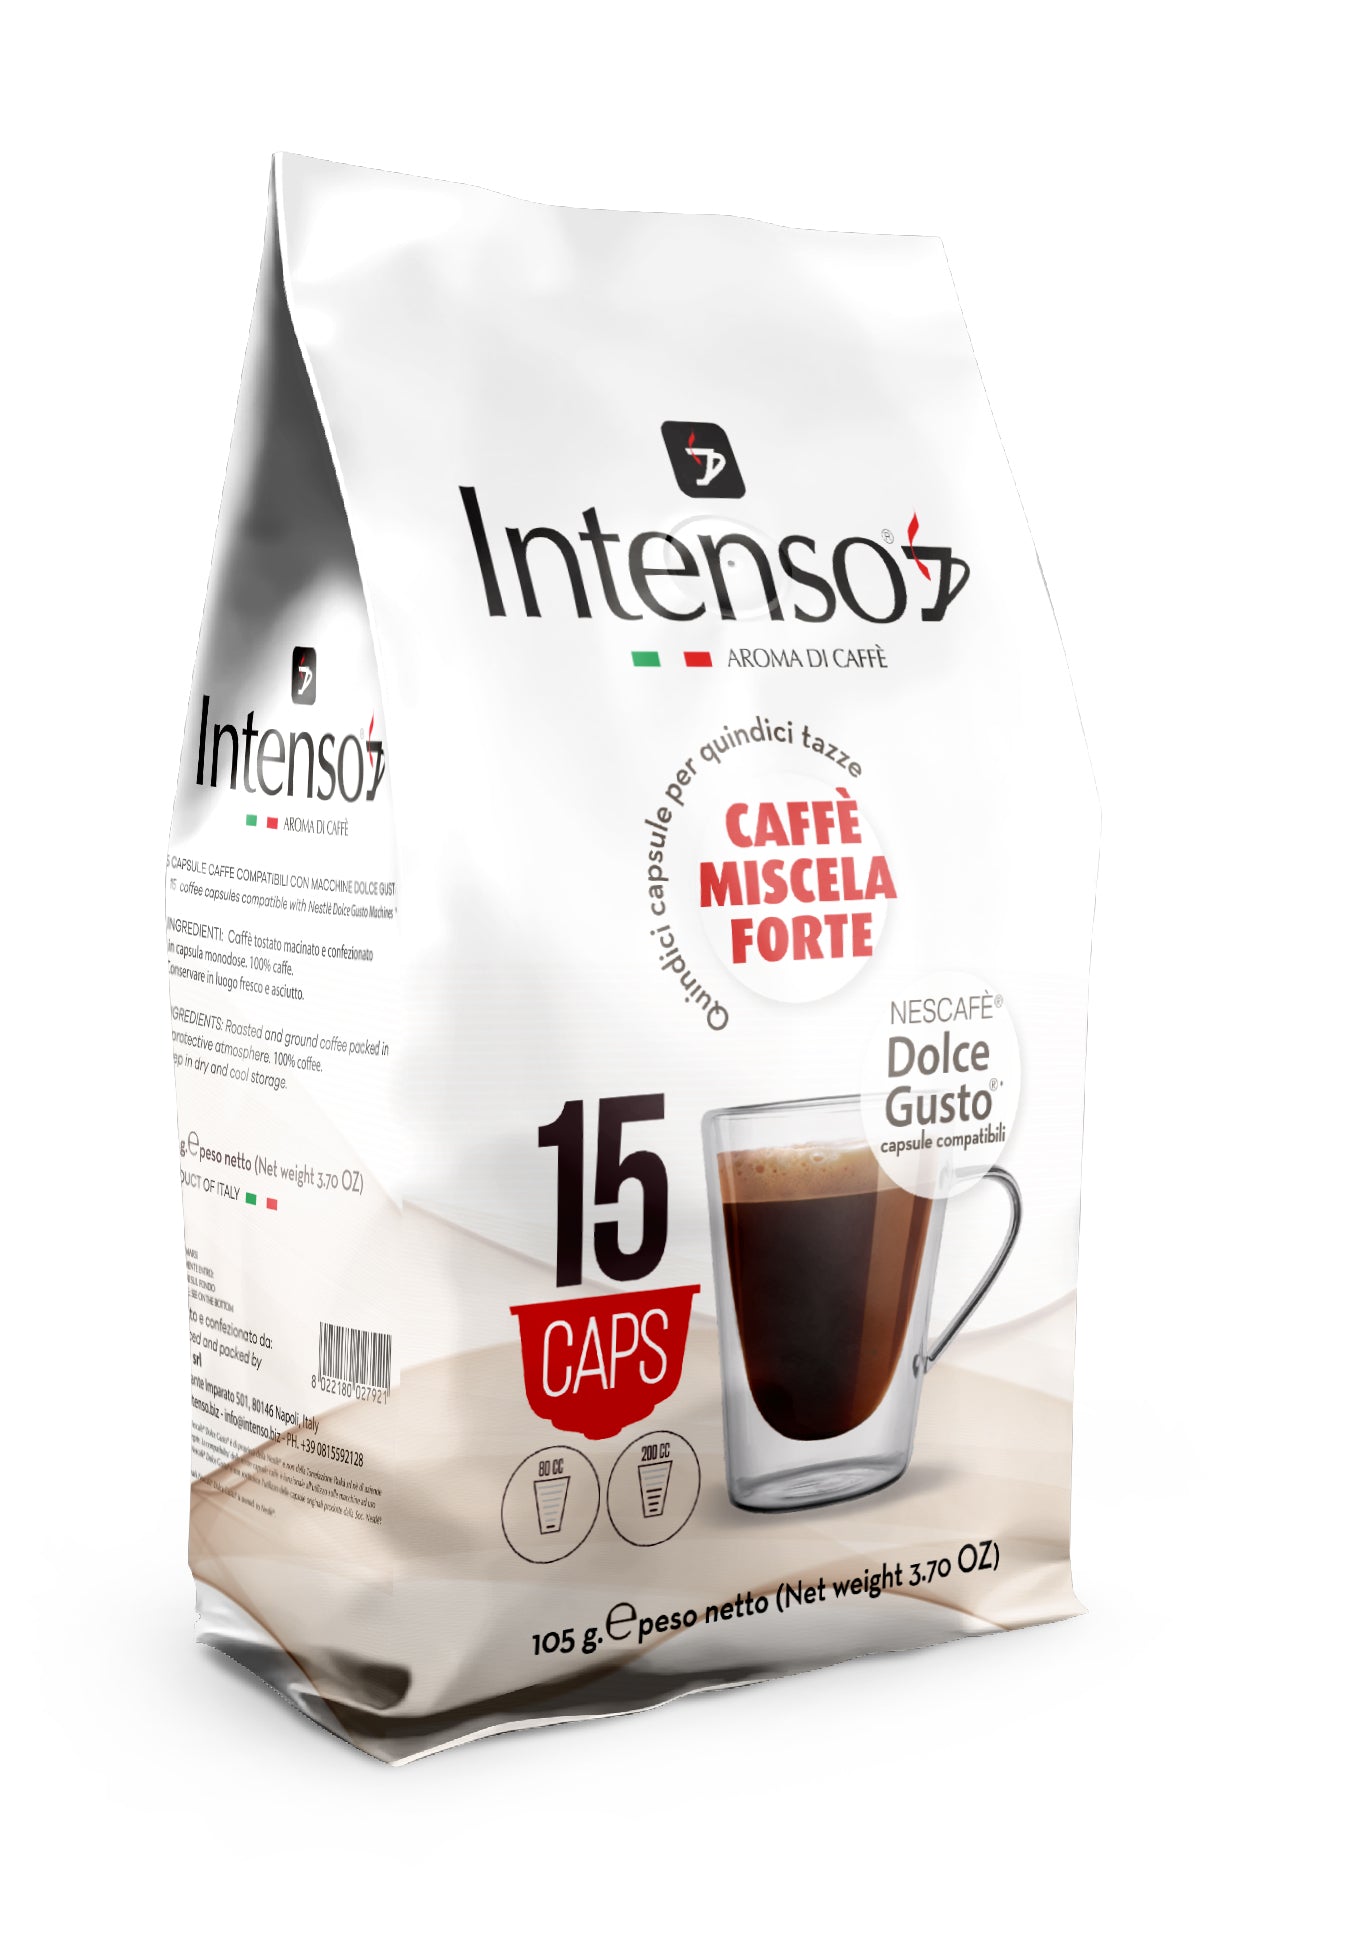 45 Intenso coffee capsules - Dolce Gusto compatible - Strong blend